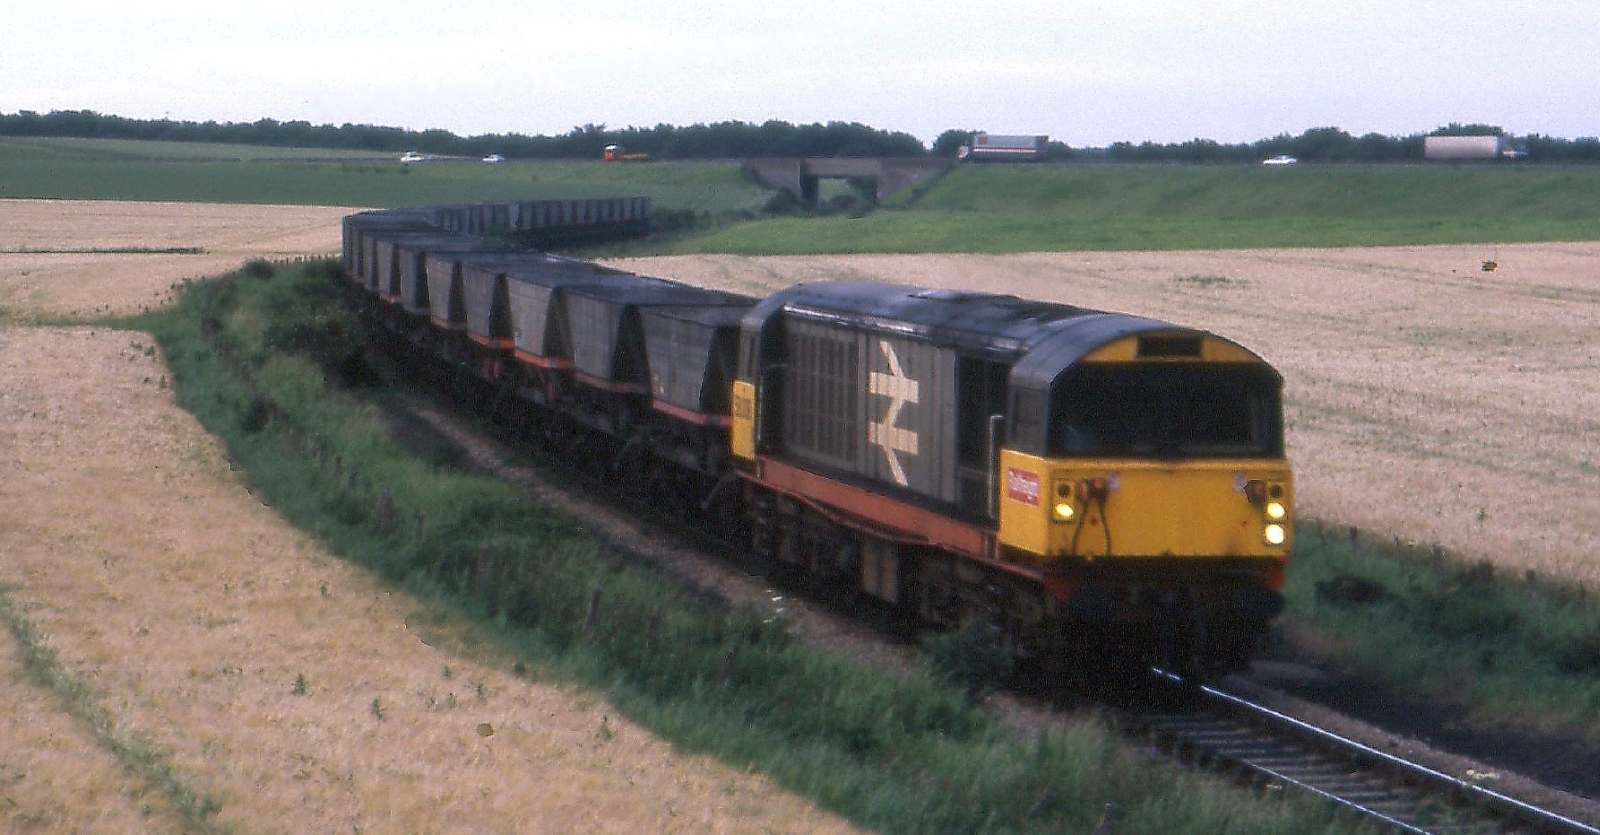 58035 with an empty coal train at Woodthorpe